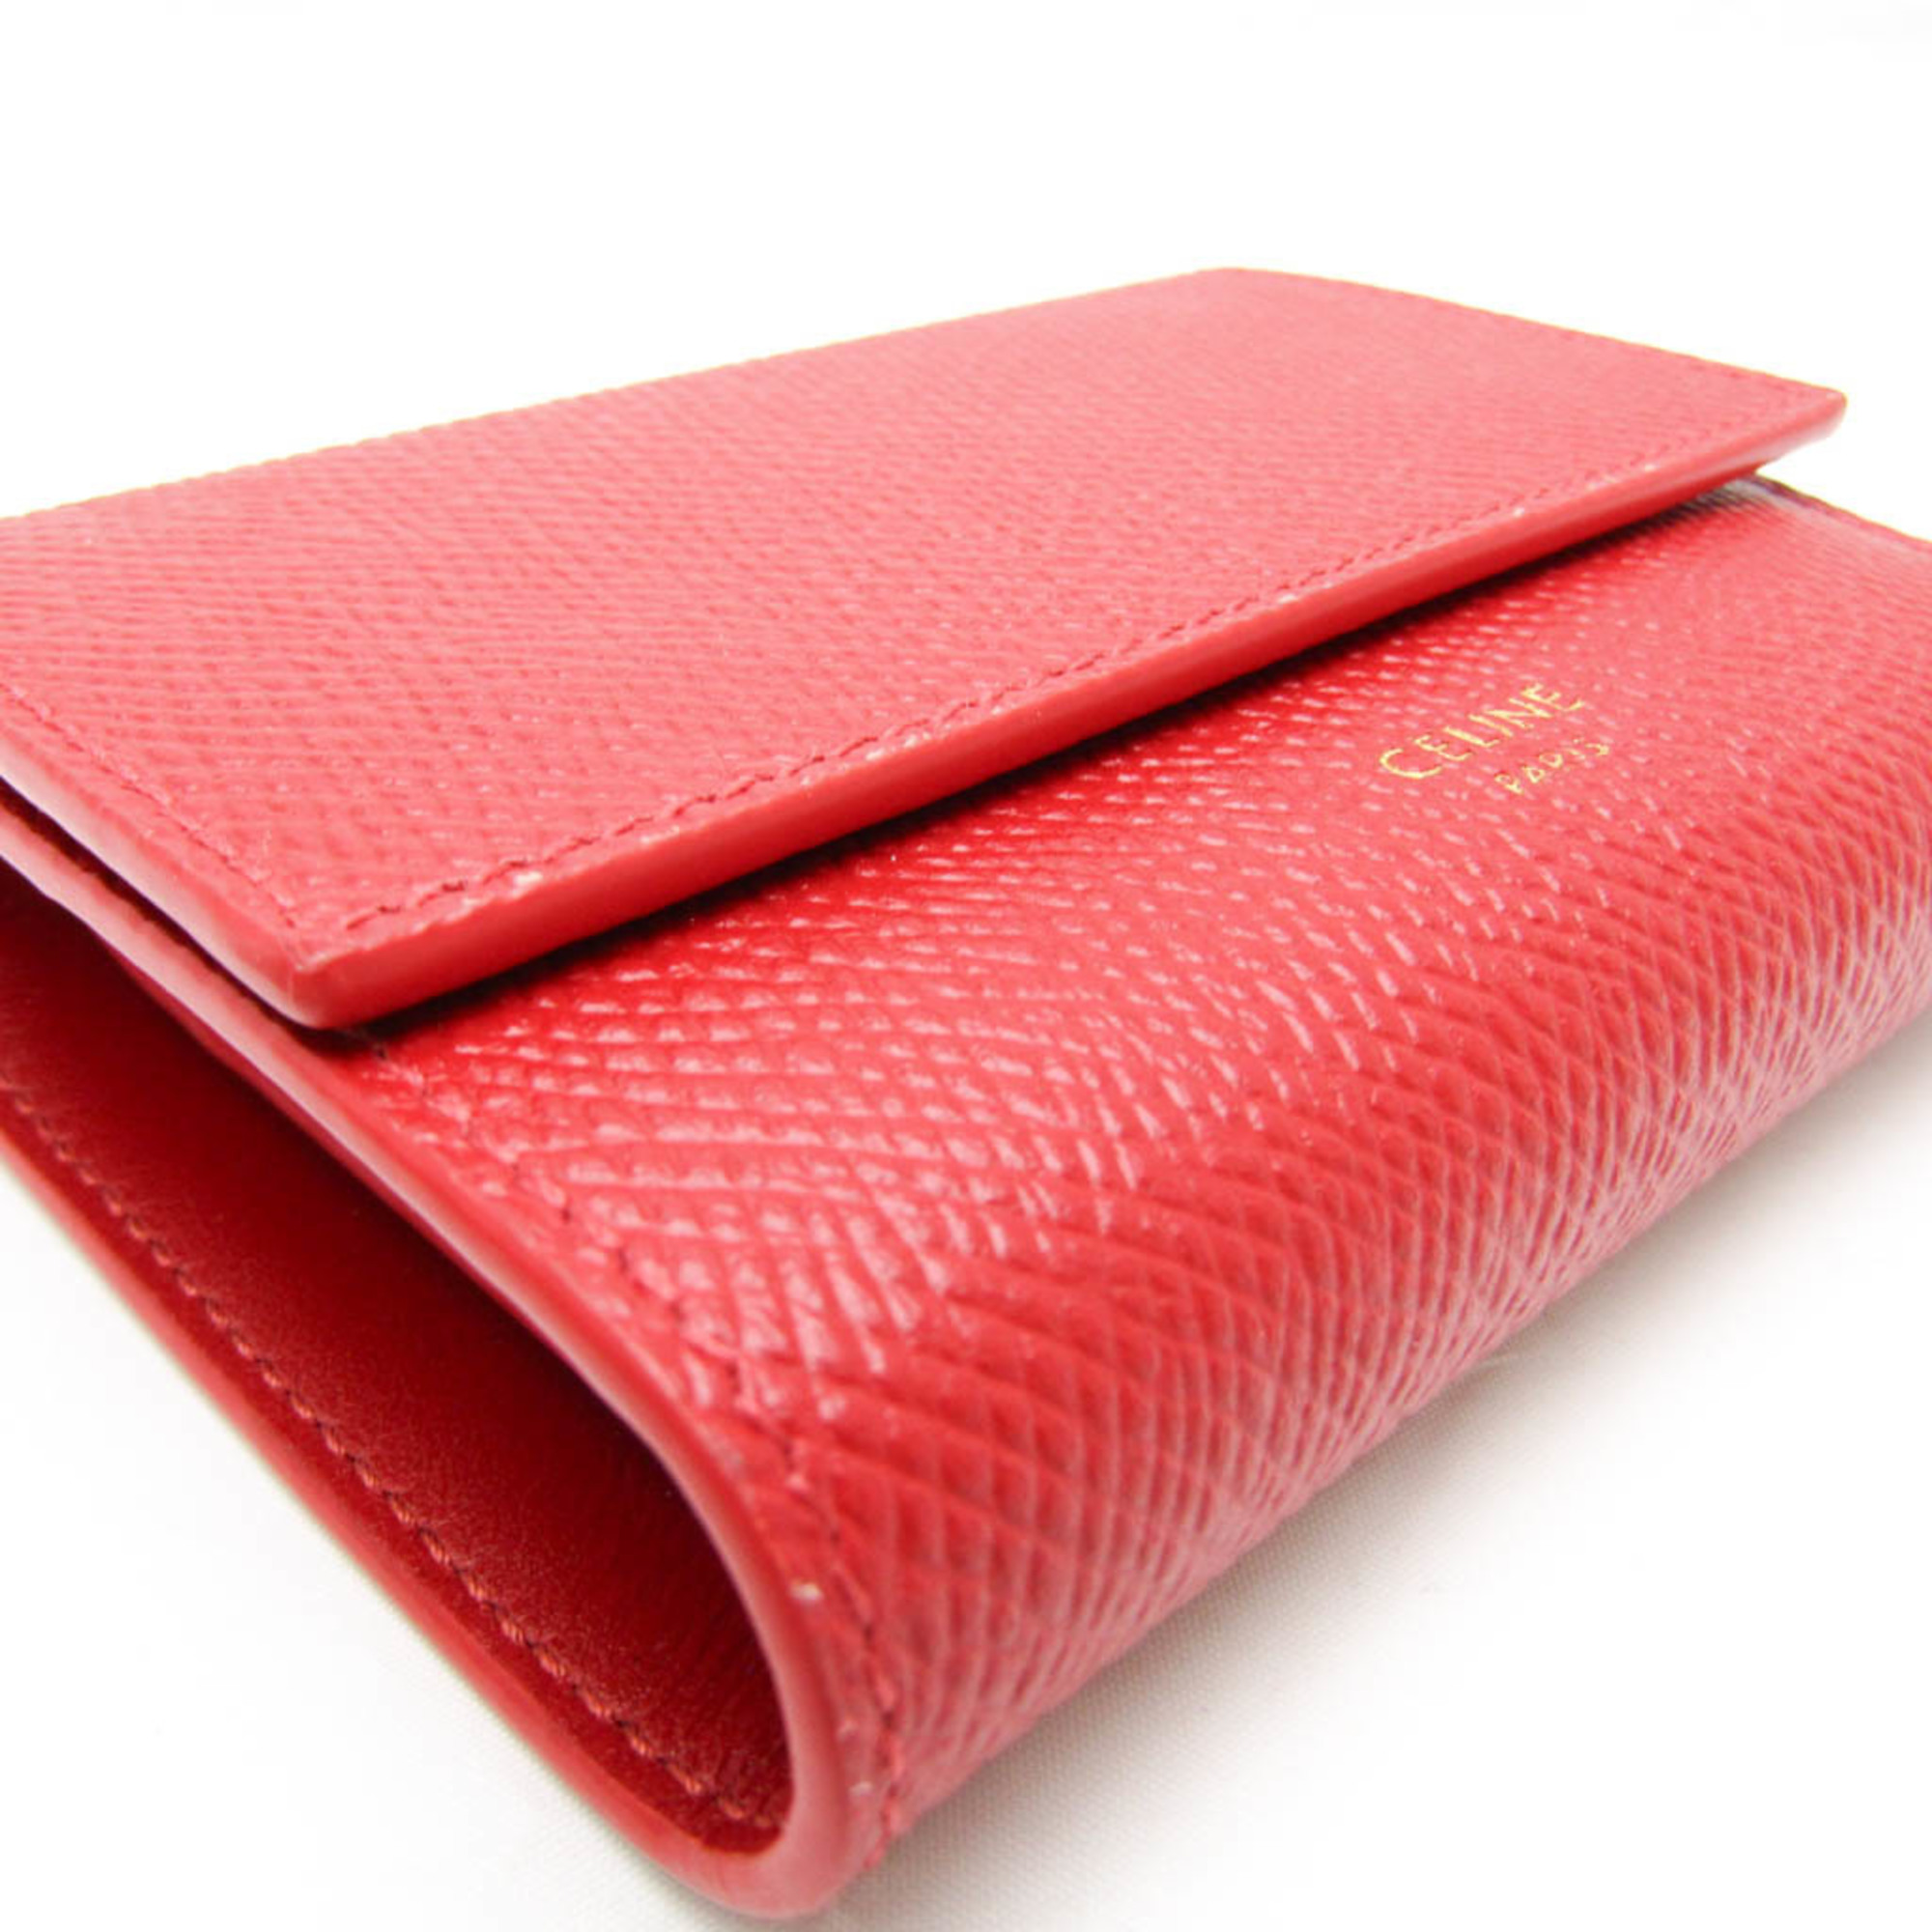 Celine SMALL TRIFOLD WALLET 10B573BEL Women's Leather Wallet (tri-fold) Red Color